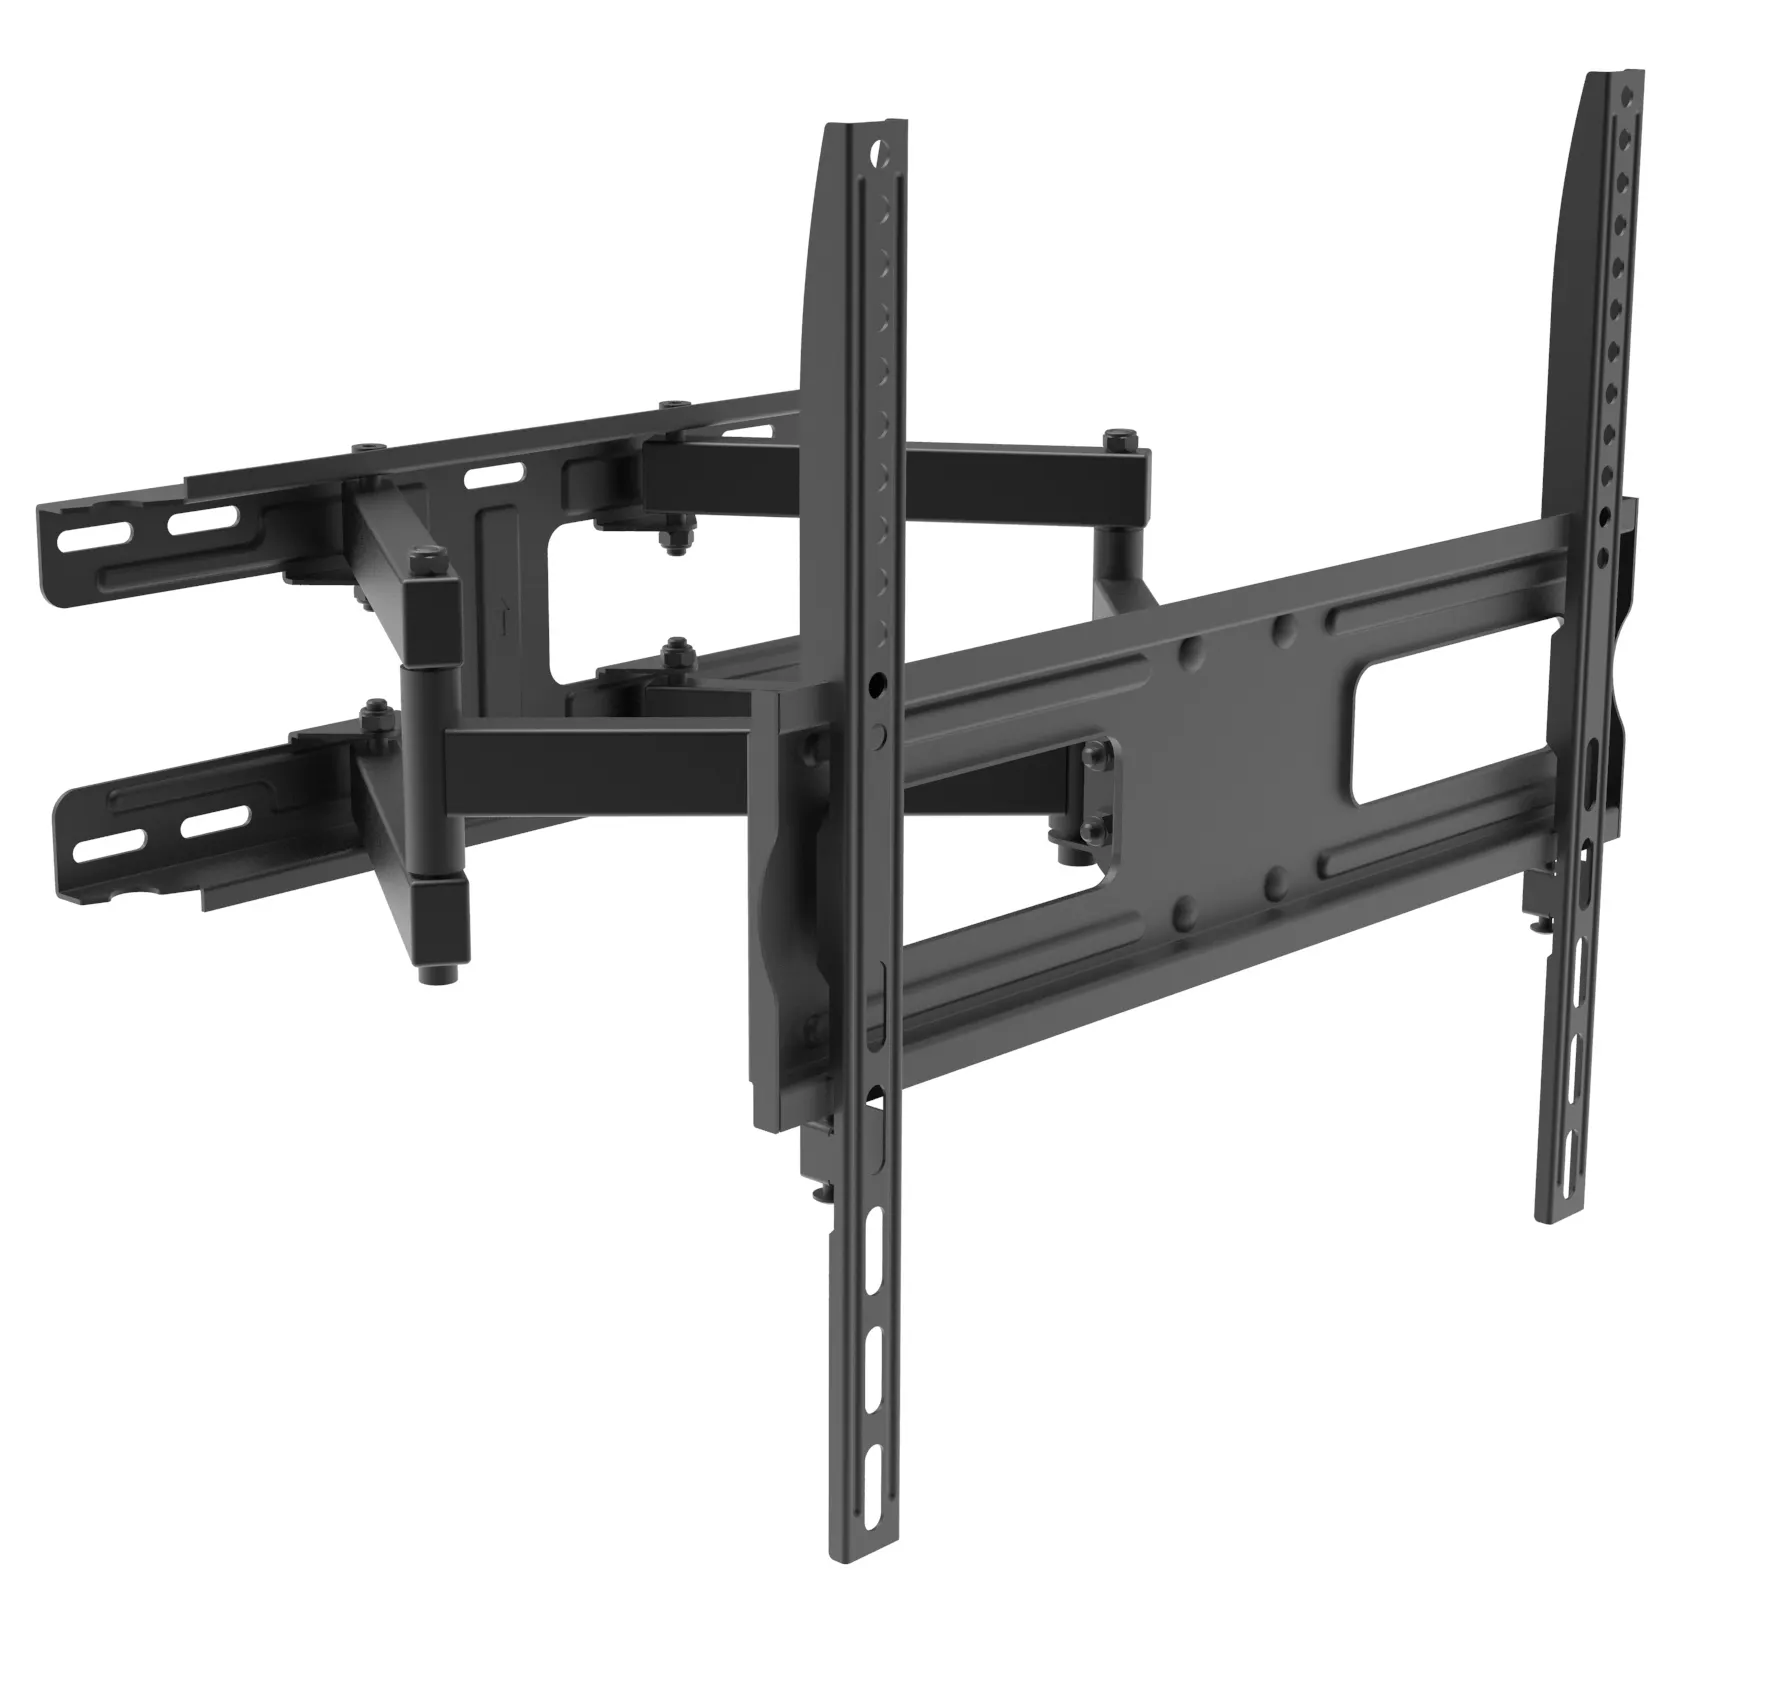 New design curved flat panel wall mount TV brackets